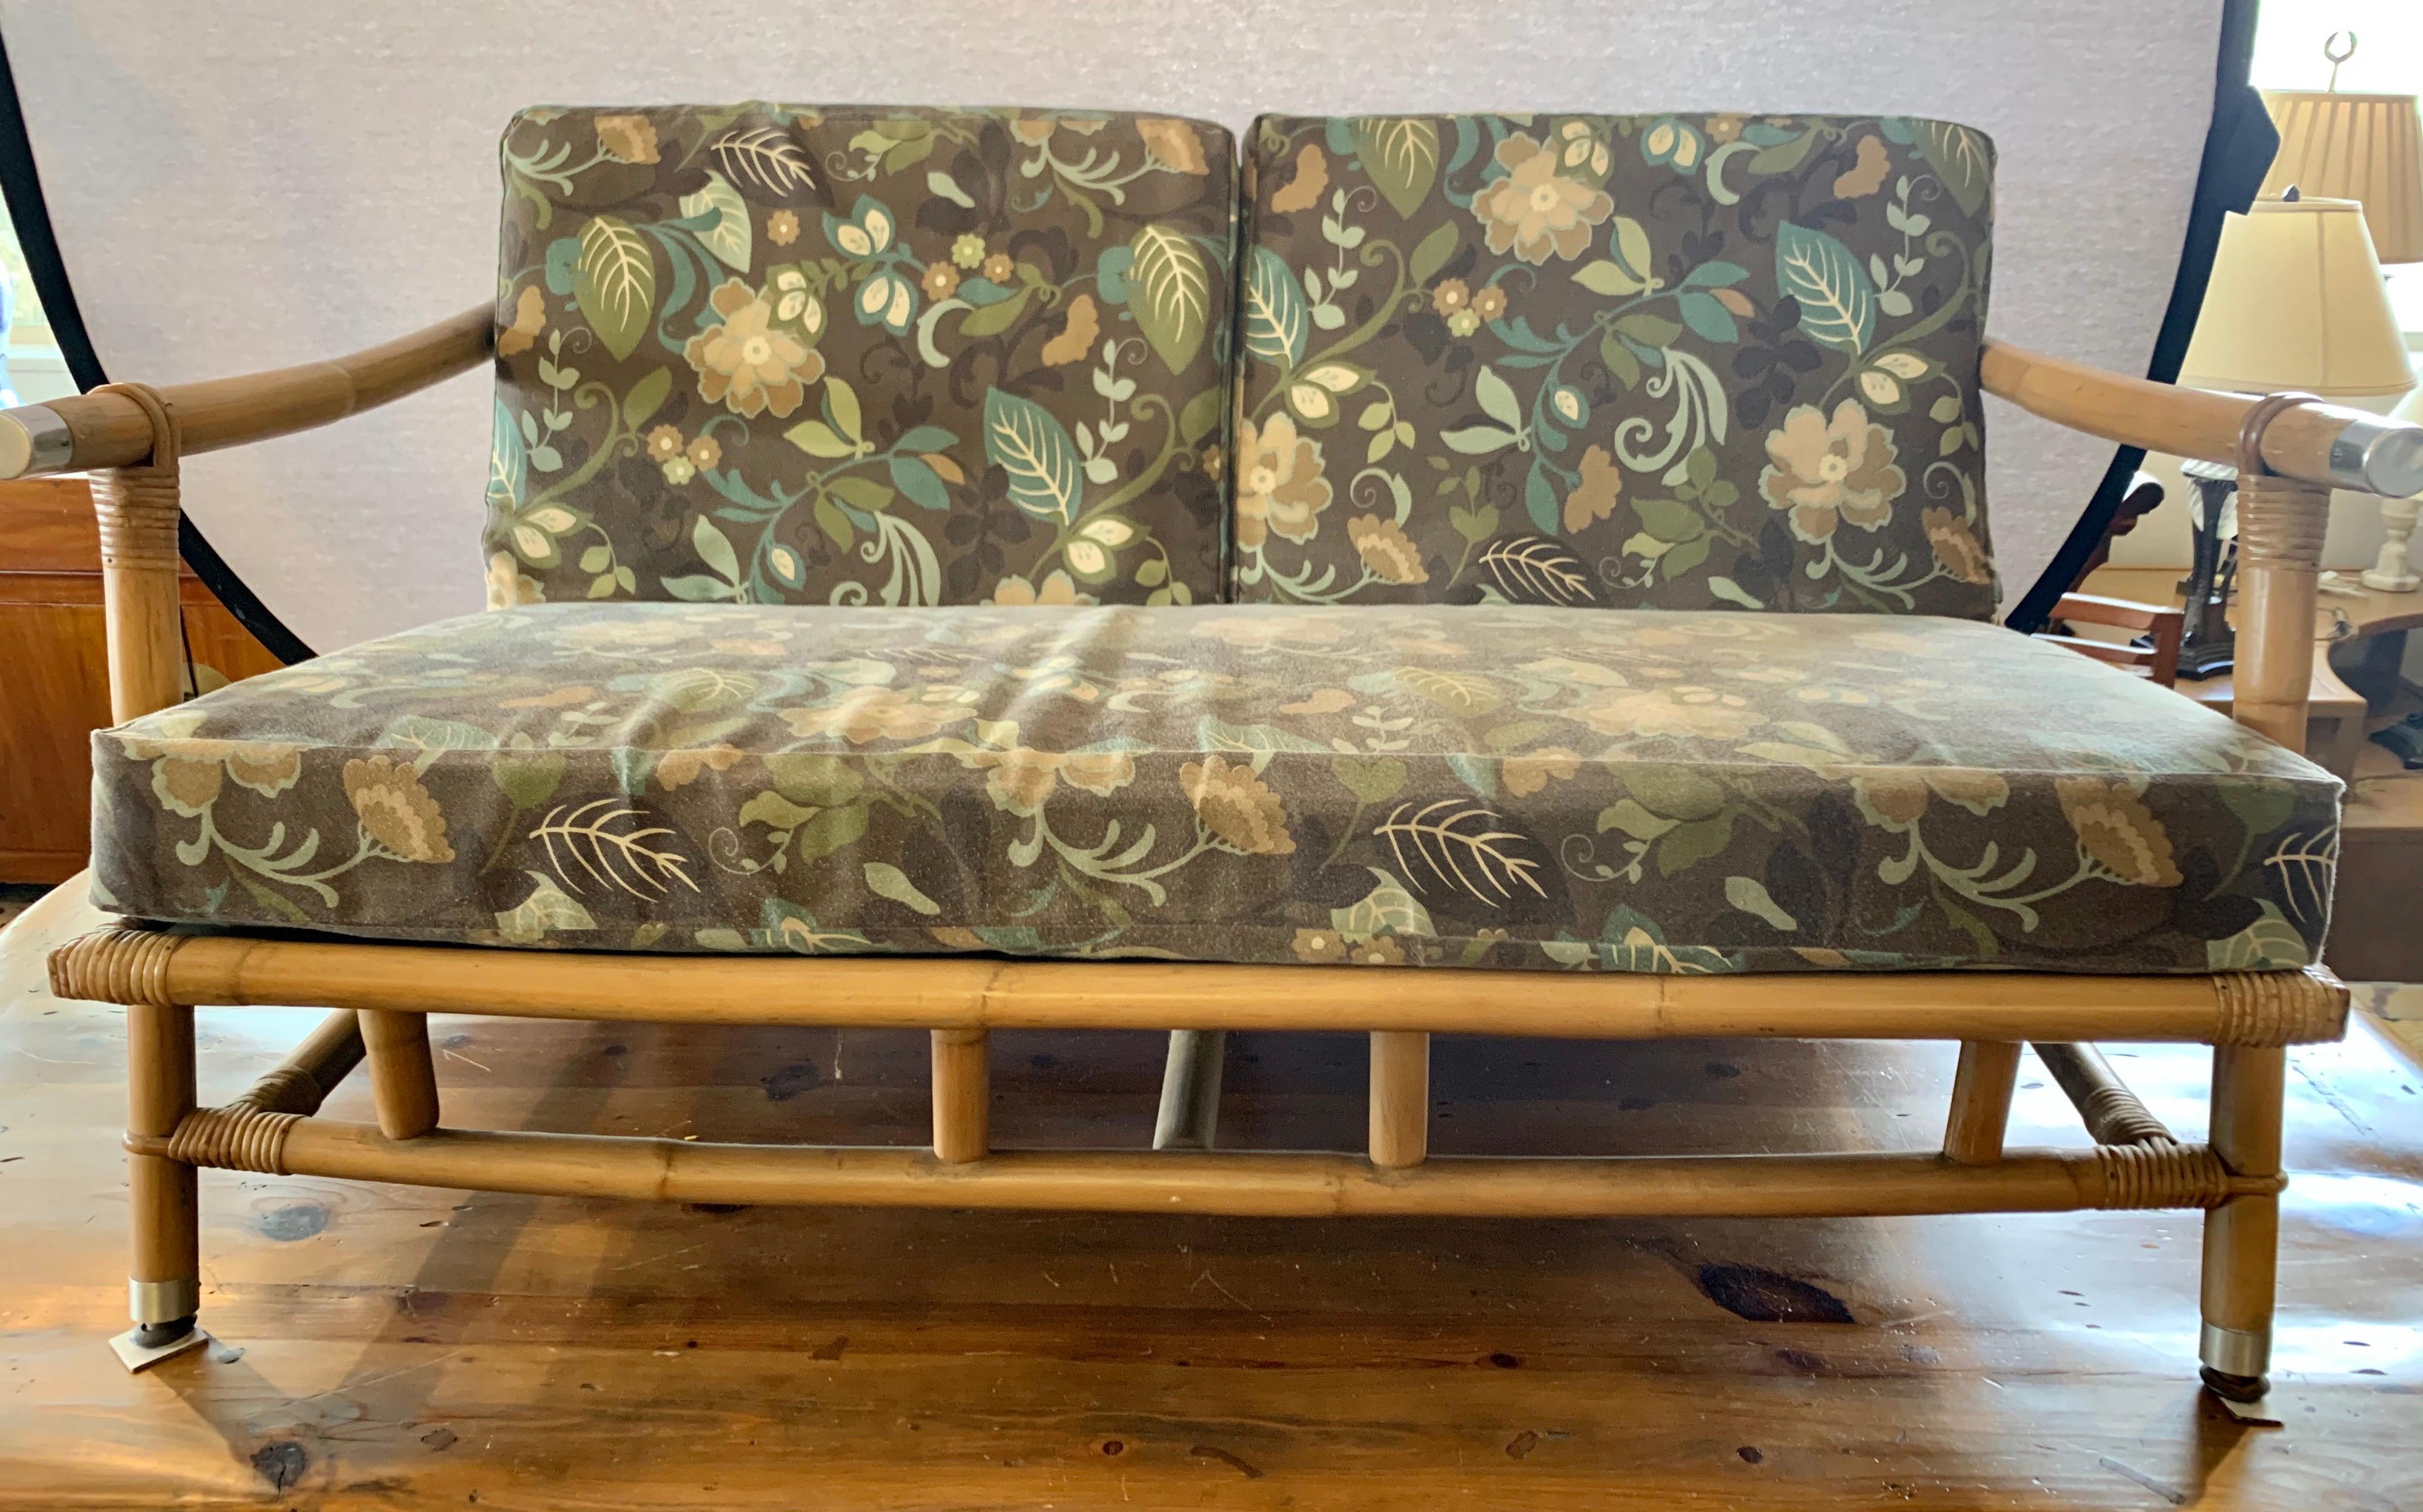 A coveted vintage Campaign style loveseat made by Ficks Reed and designed by John Wisner, circa 1954. Stout rattan and bamboo frame with a beautiful raffia seat back. Handsome solid metal accents mark the arms. Fabulous design, quality and